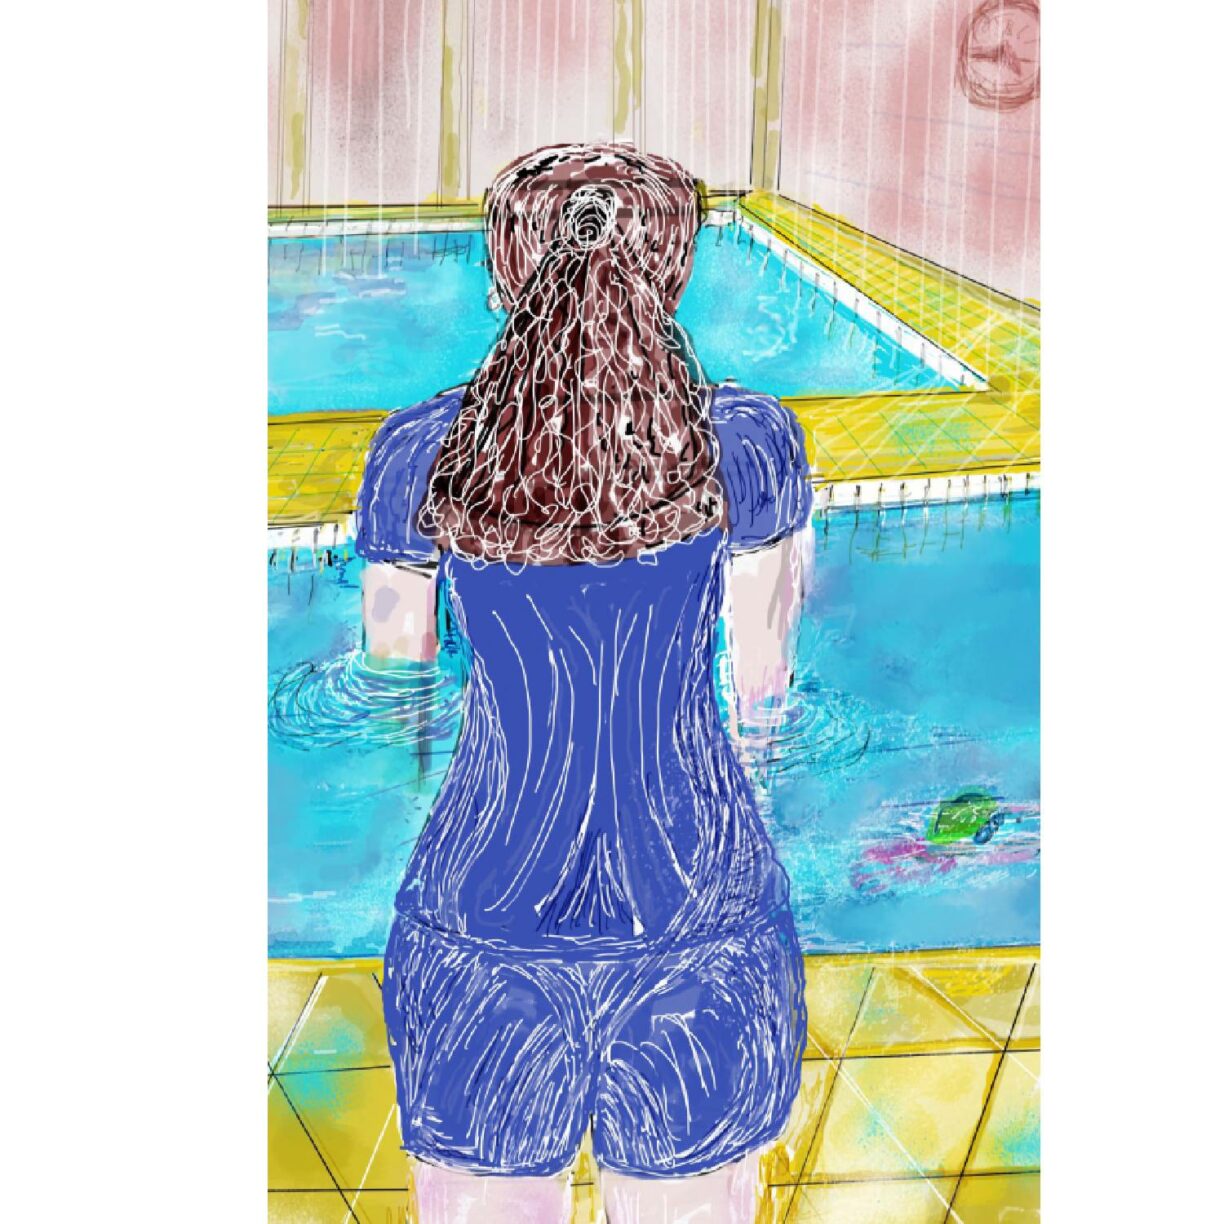 Example of Indie's work, print showing the back of a girl standing by a pool